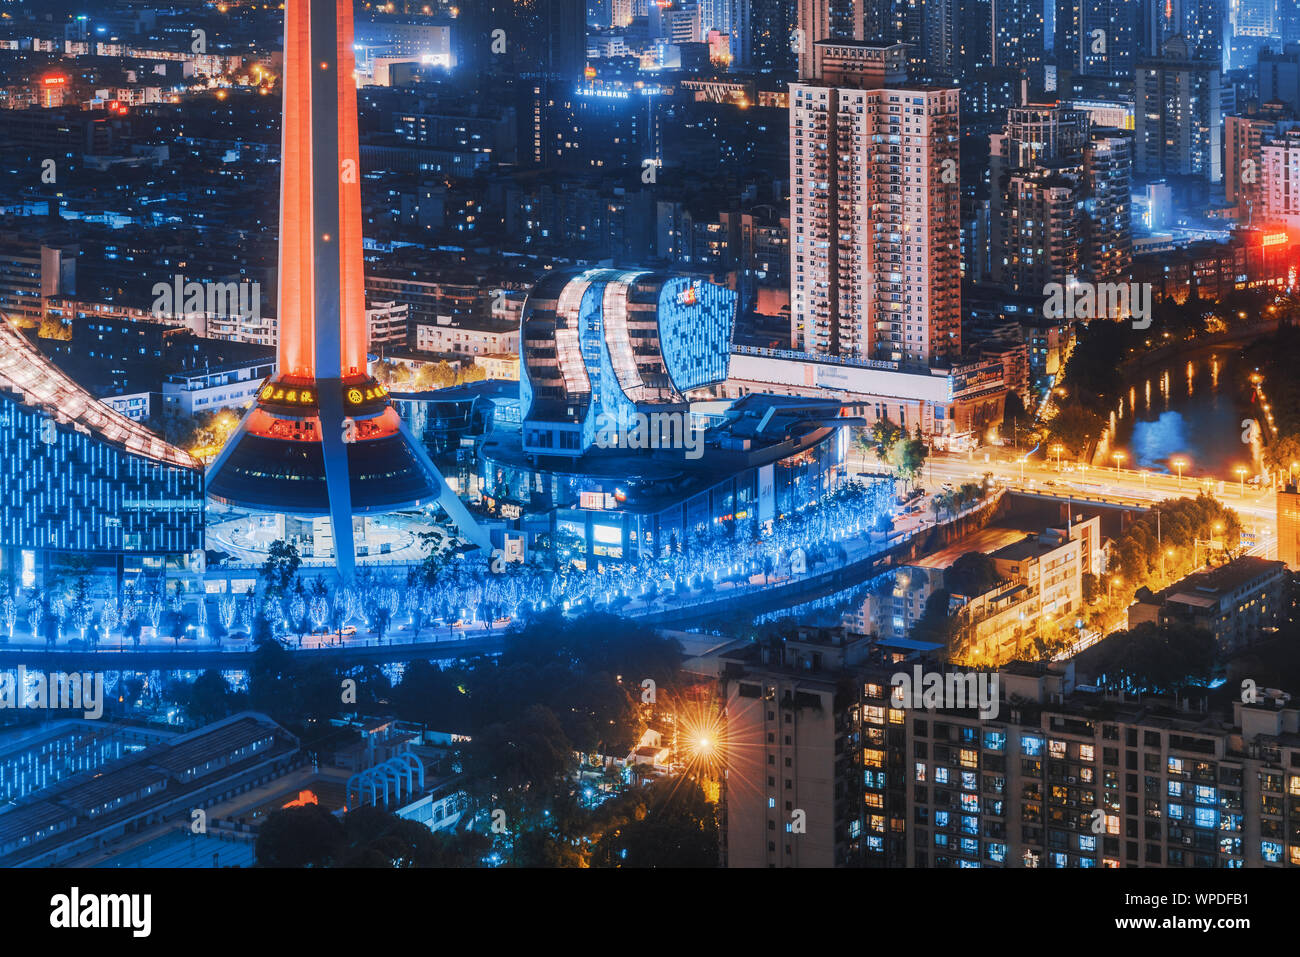 Chengdu, Sichuan province, China - May 16, 2016 : Sichuan TV tower and 339 building illuminated at night aerial view Stock Photo